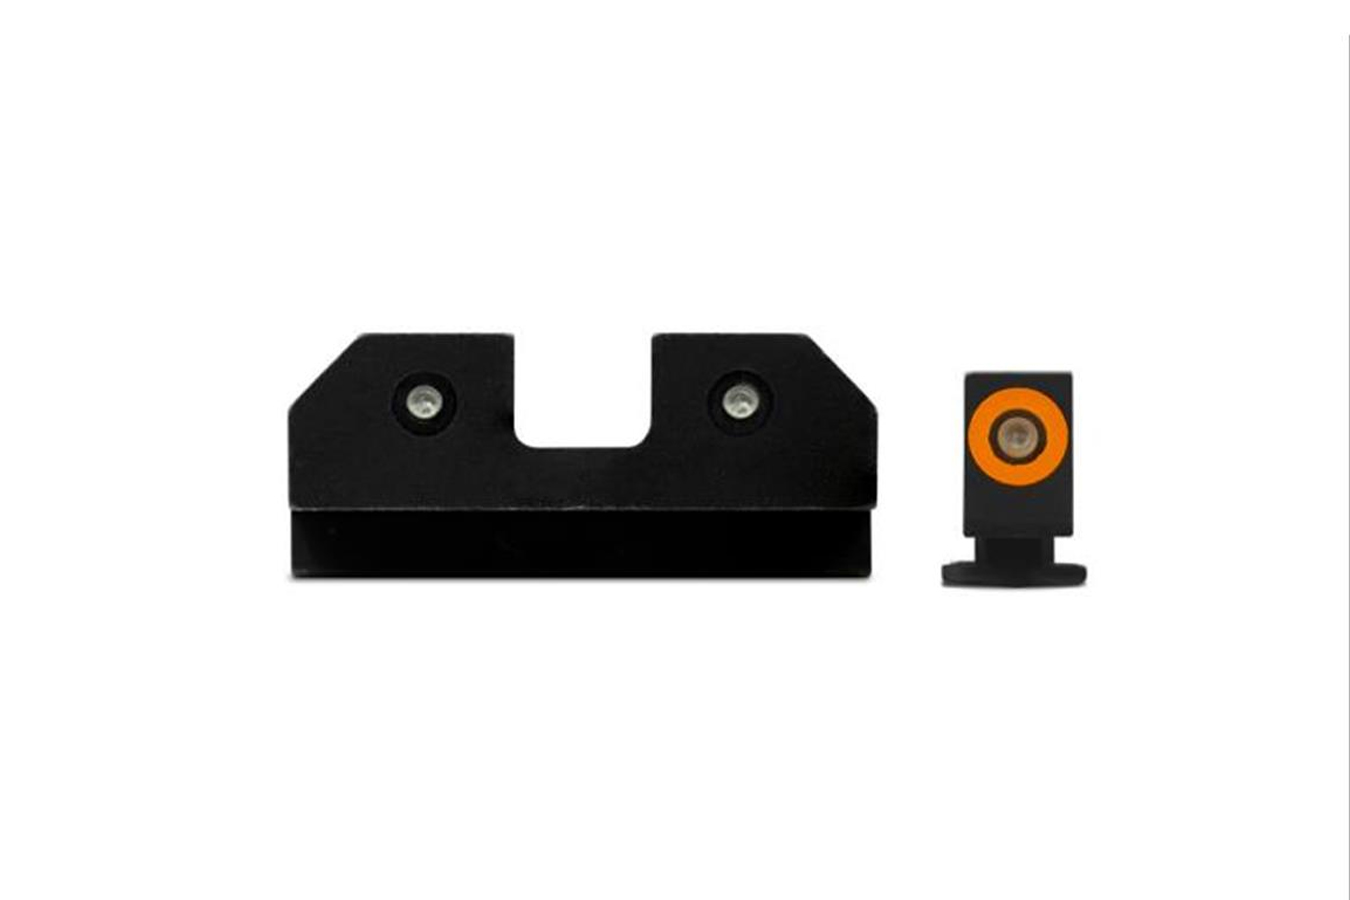 XS SIGHT SYSTEMS R3D NIGHT SIGHTS ORANGE (FOR GLOCK 17, 19, 22-24, 26, 27, 31-36, 38, 45)